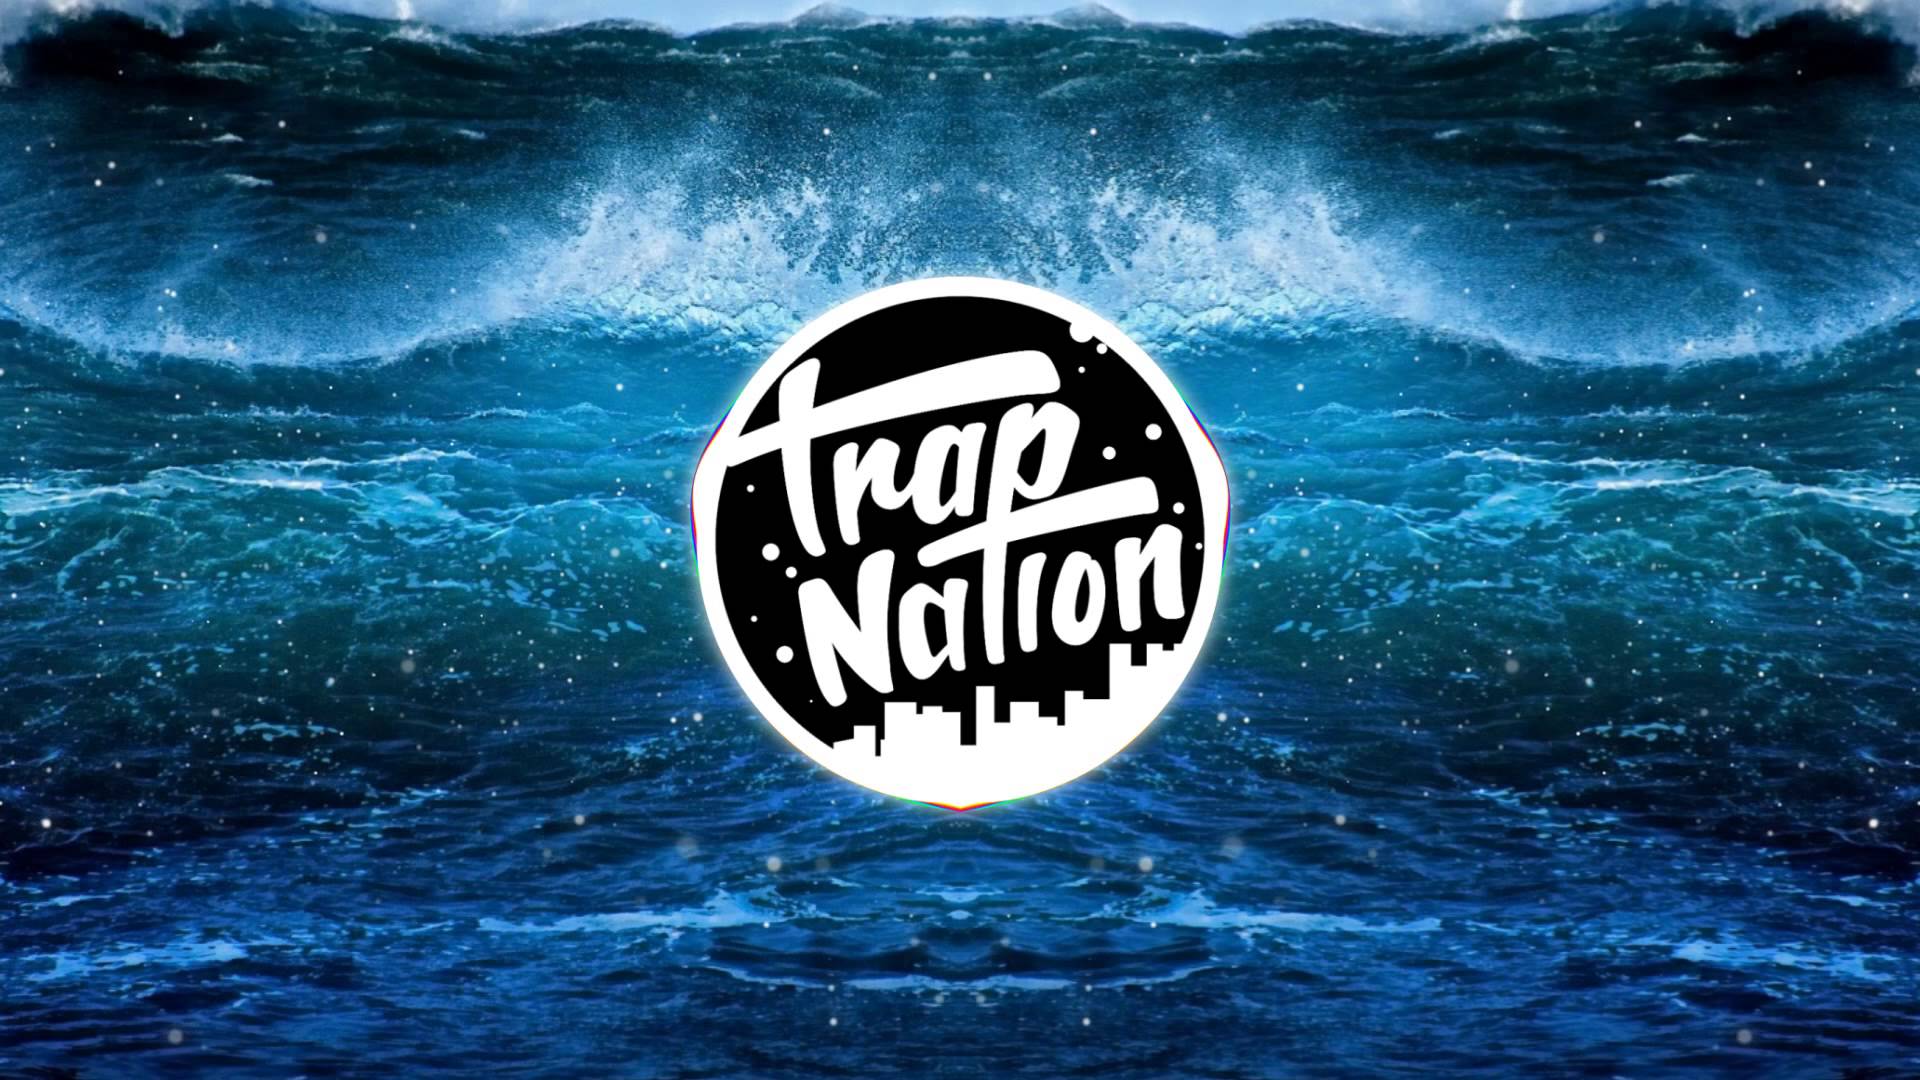 best image about trap nation. Don't let me down